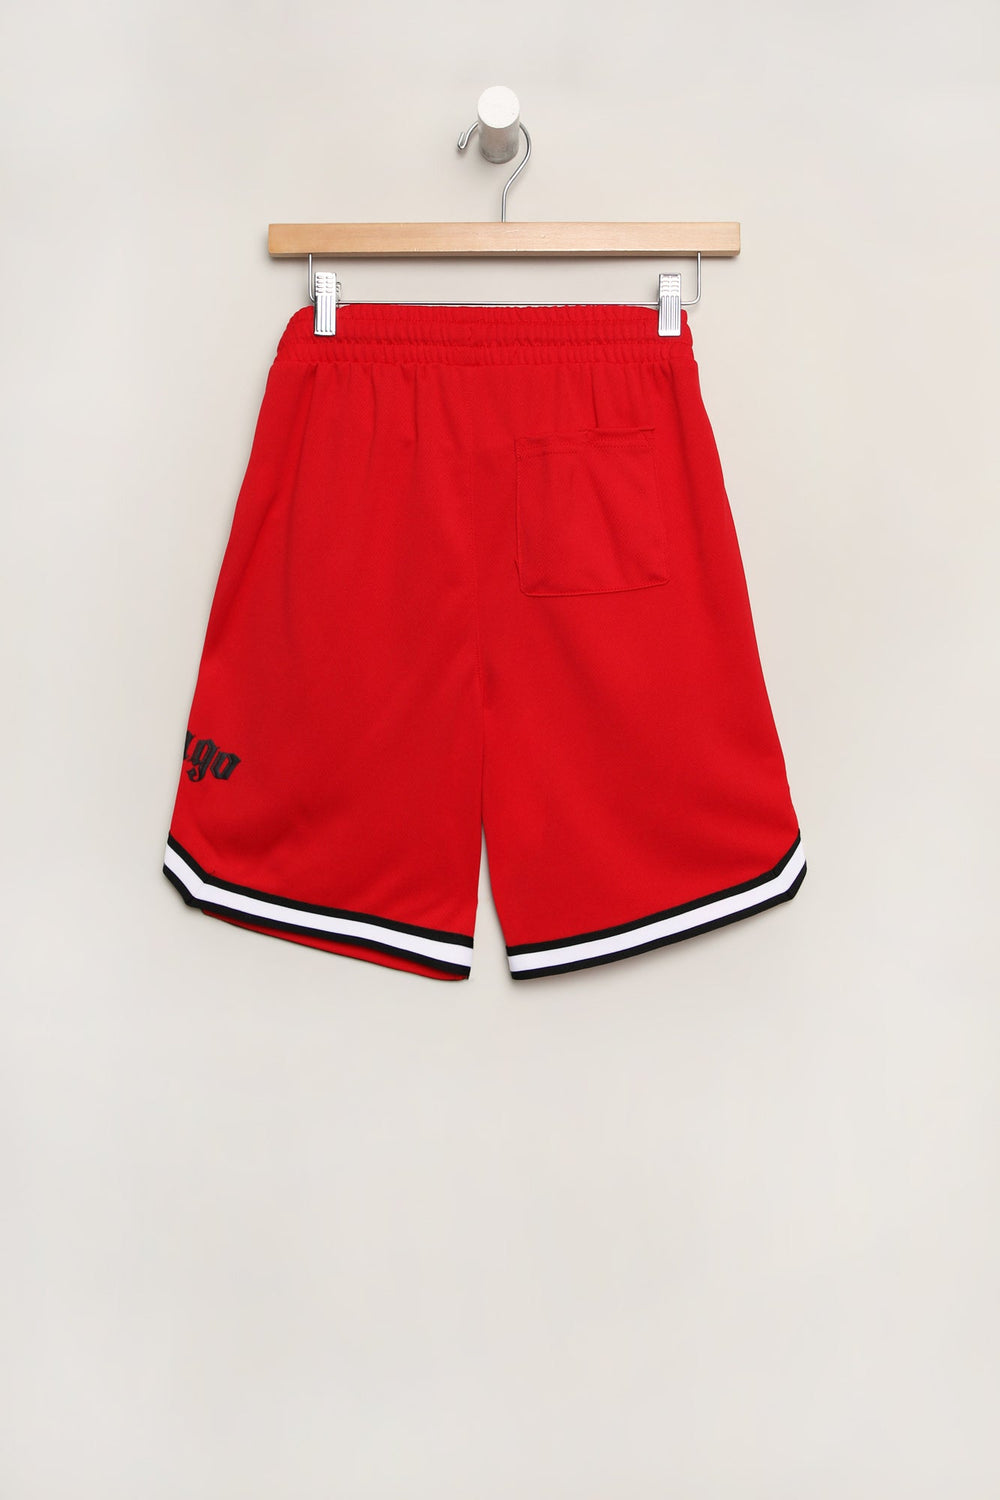 West49 Youth Chicago Mesh Shorts West49 Youth Chicago Mesh Shorts